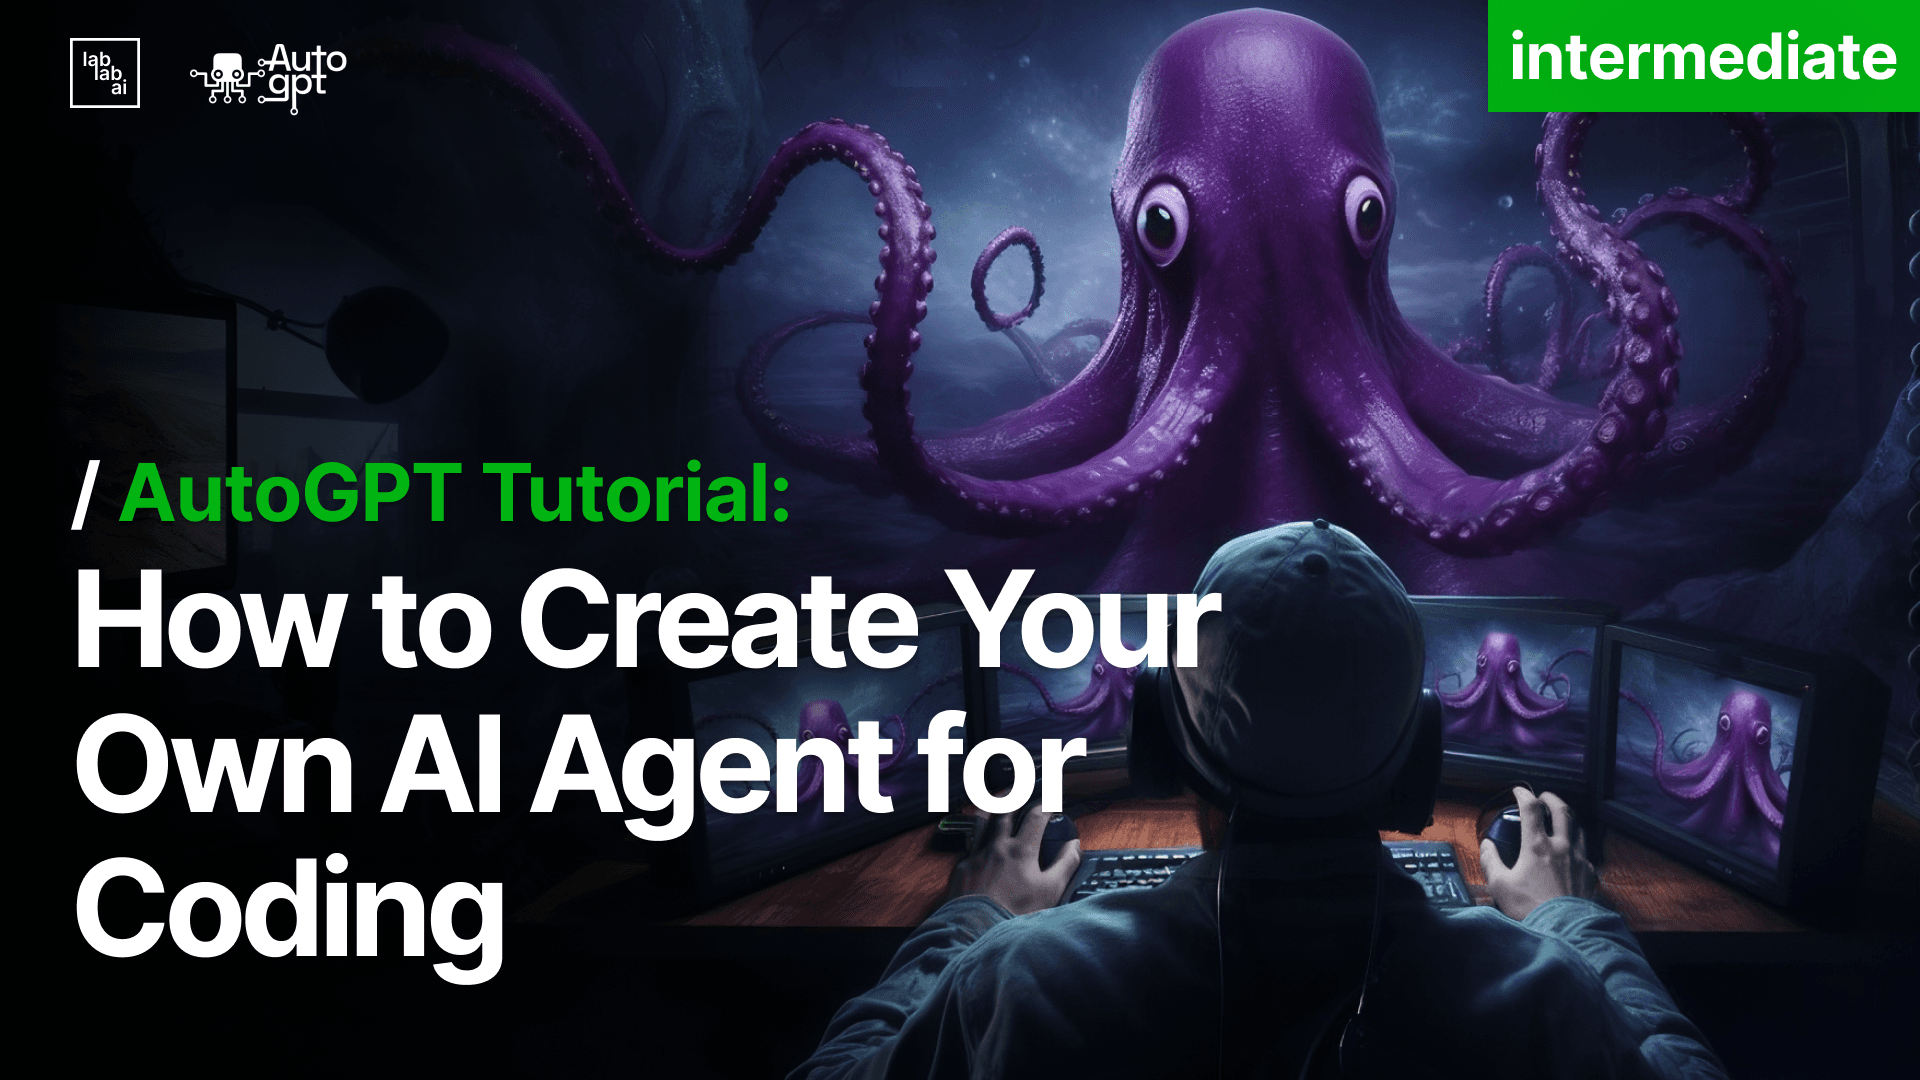 How to Use AutoGPT to Create Your Own AI Agent for Coding